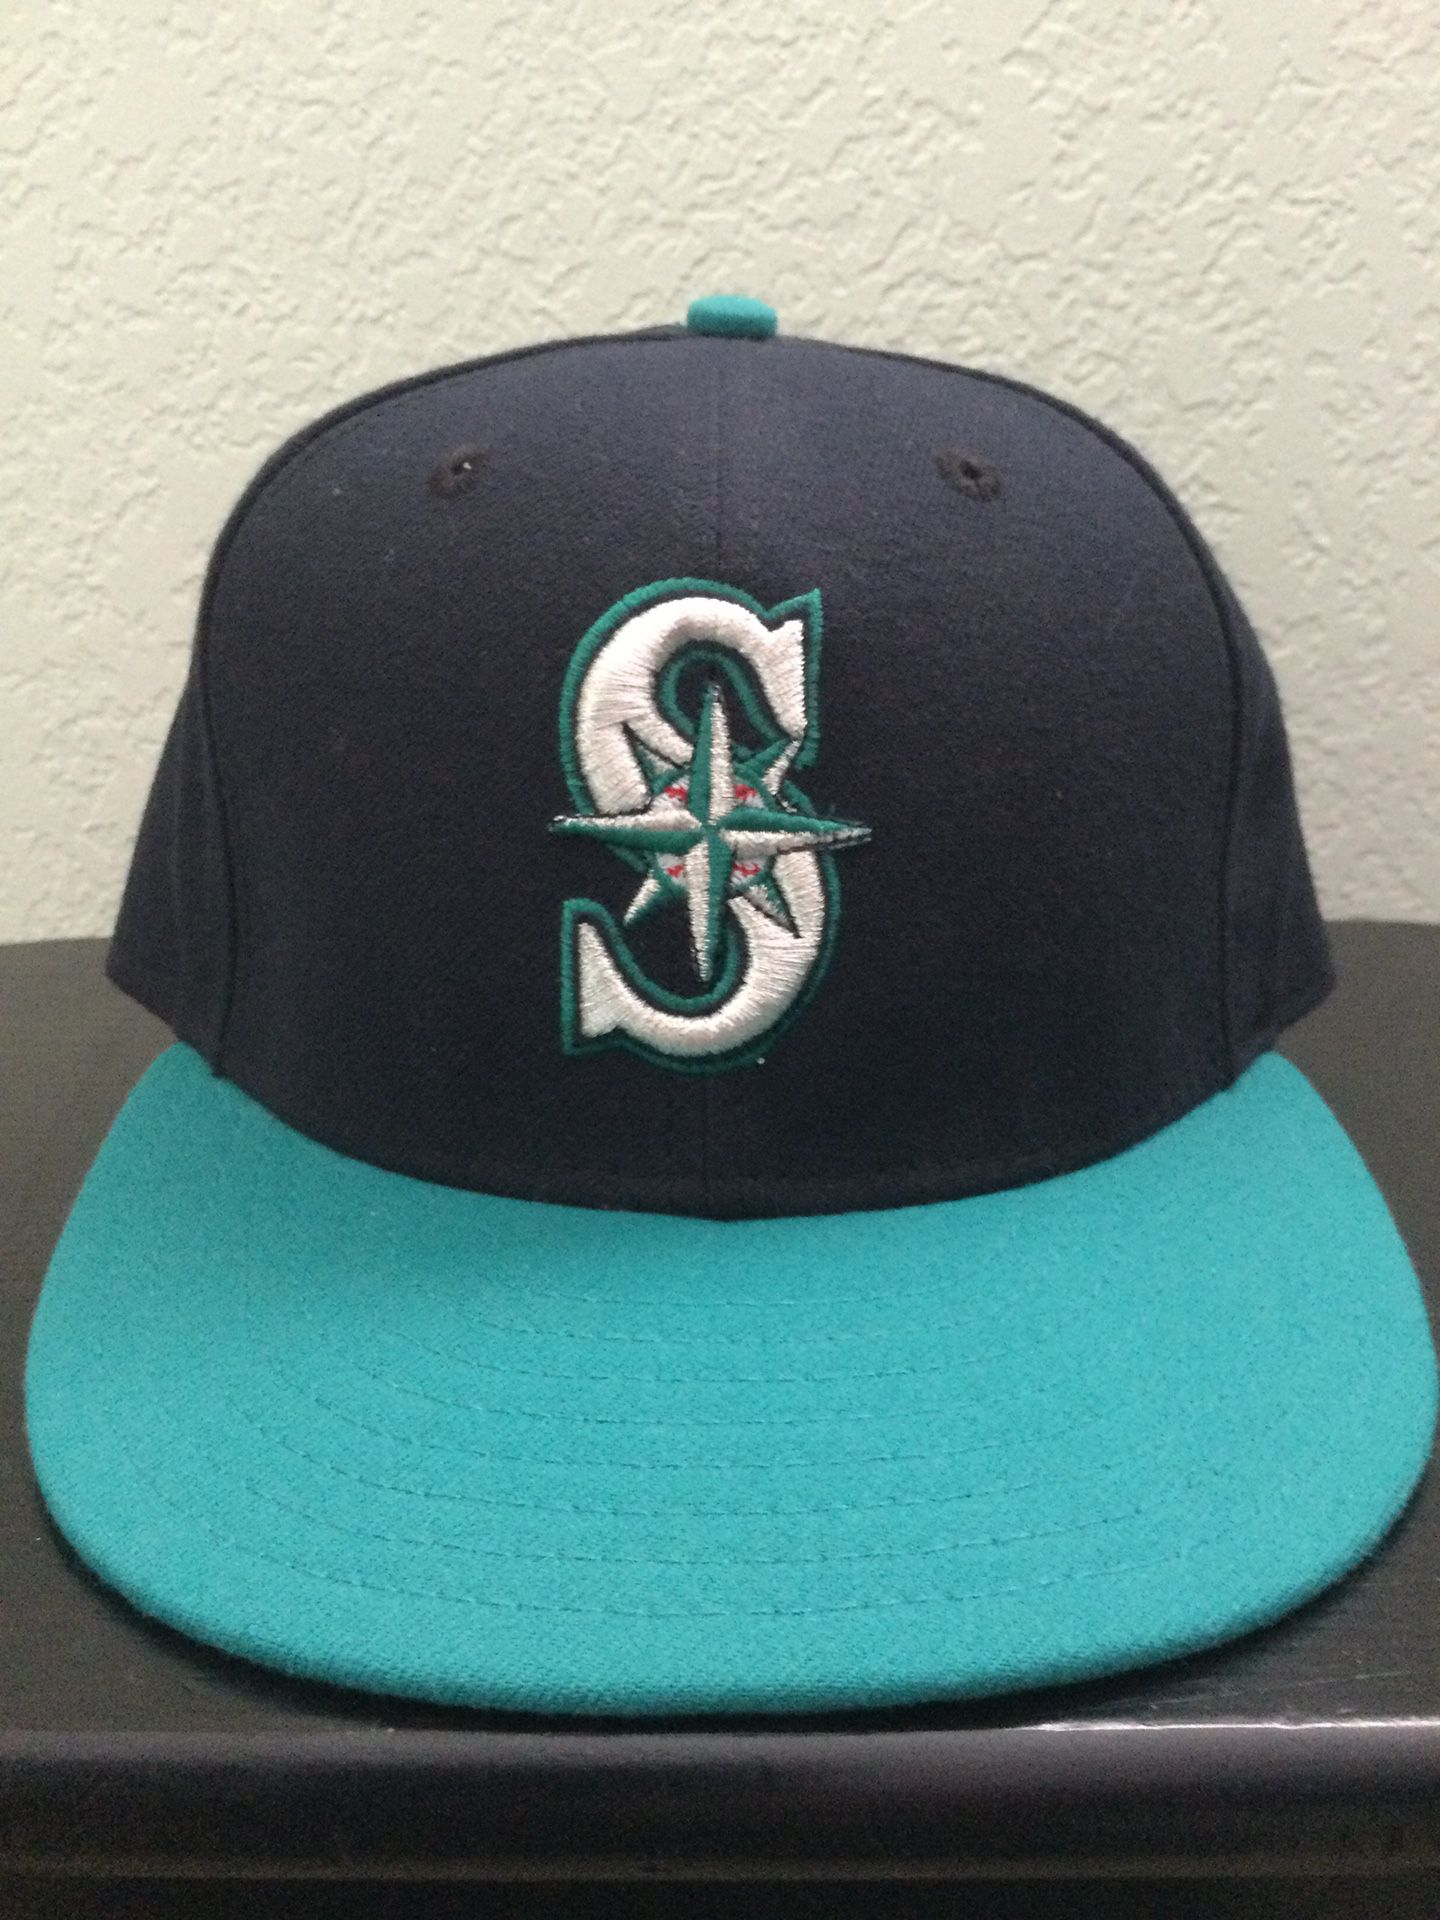 Seattle Mariners New Era 59FIFTY Size 7.5 MLB On-Field Made In U.S.A Hat Cap